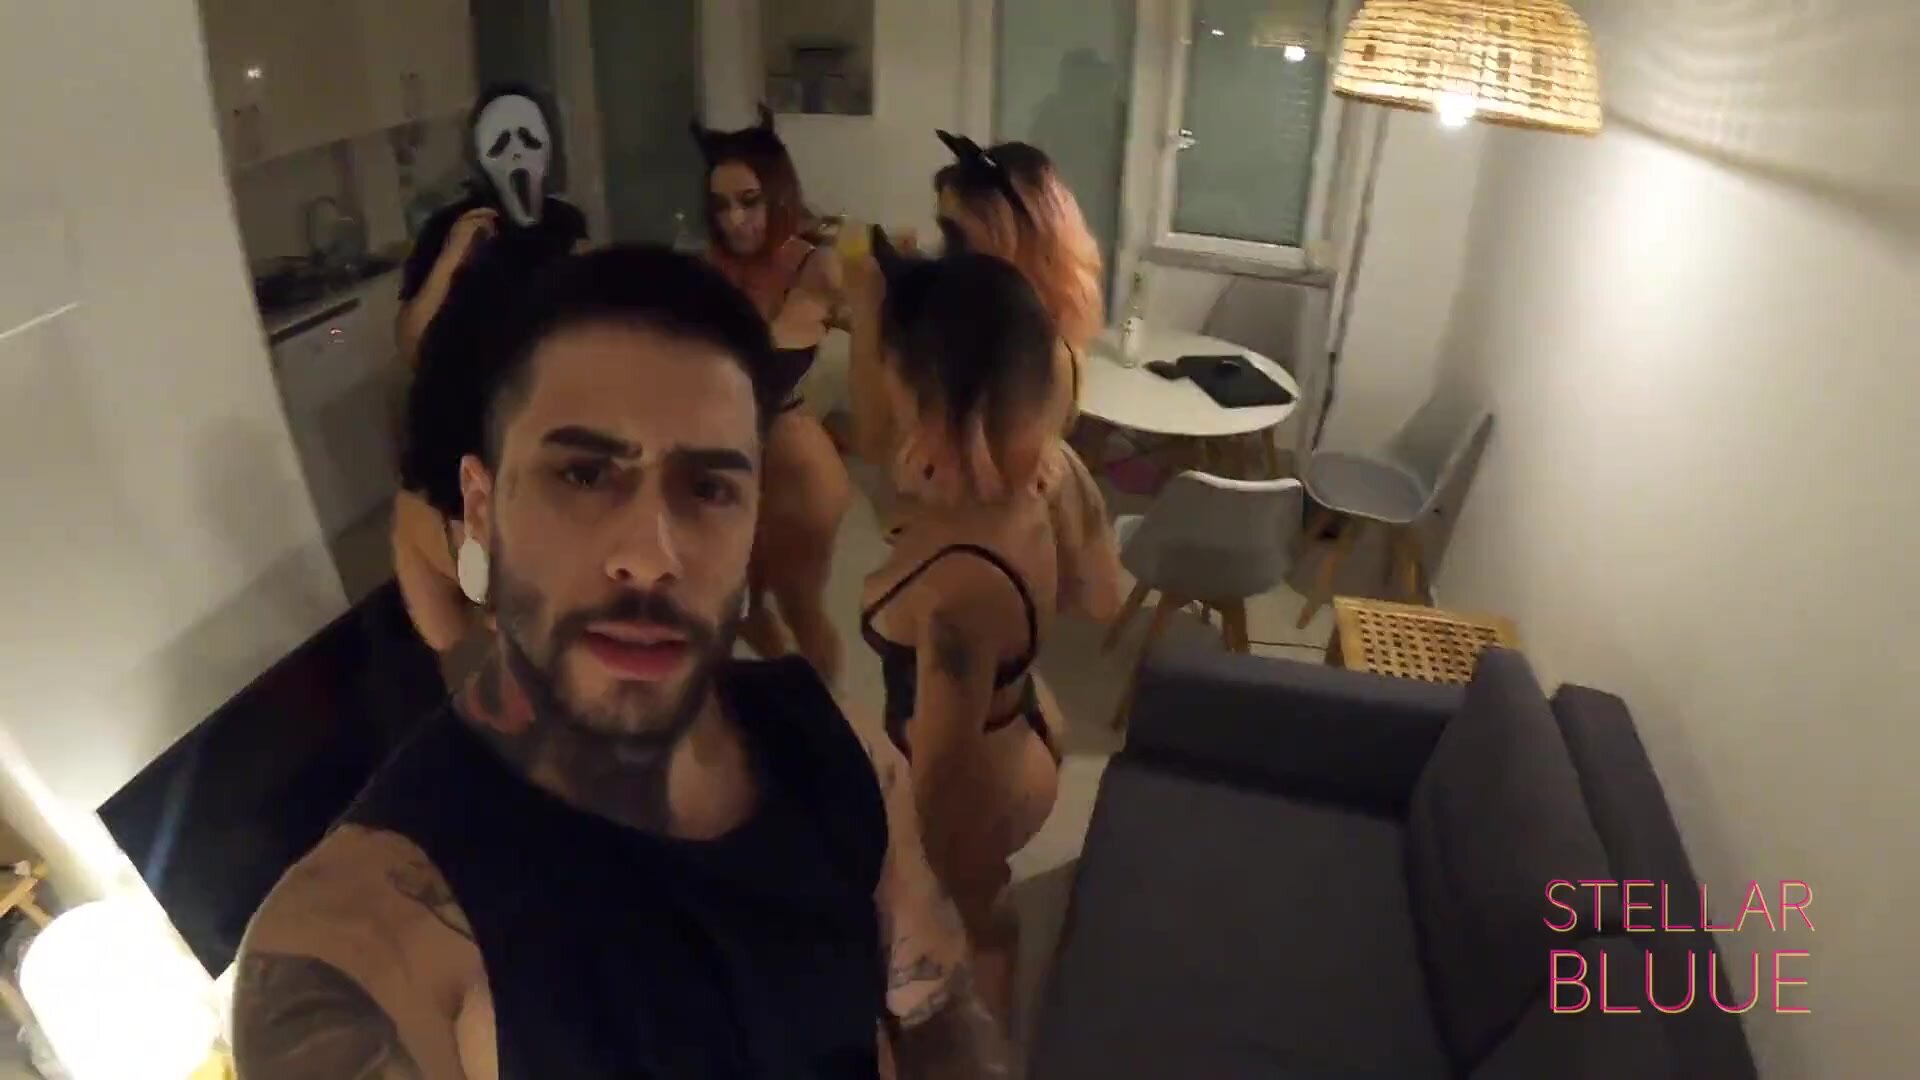 Halloween Party Ends With A Orgy